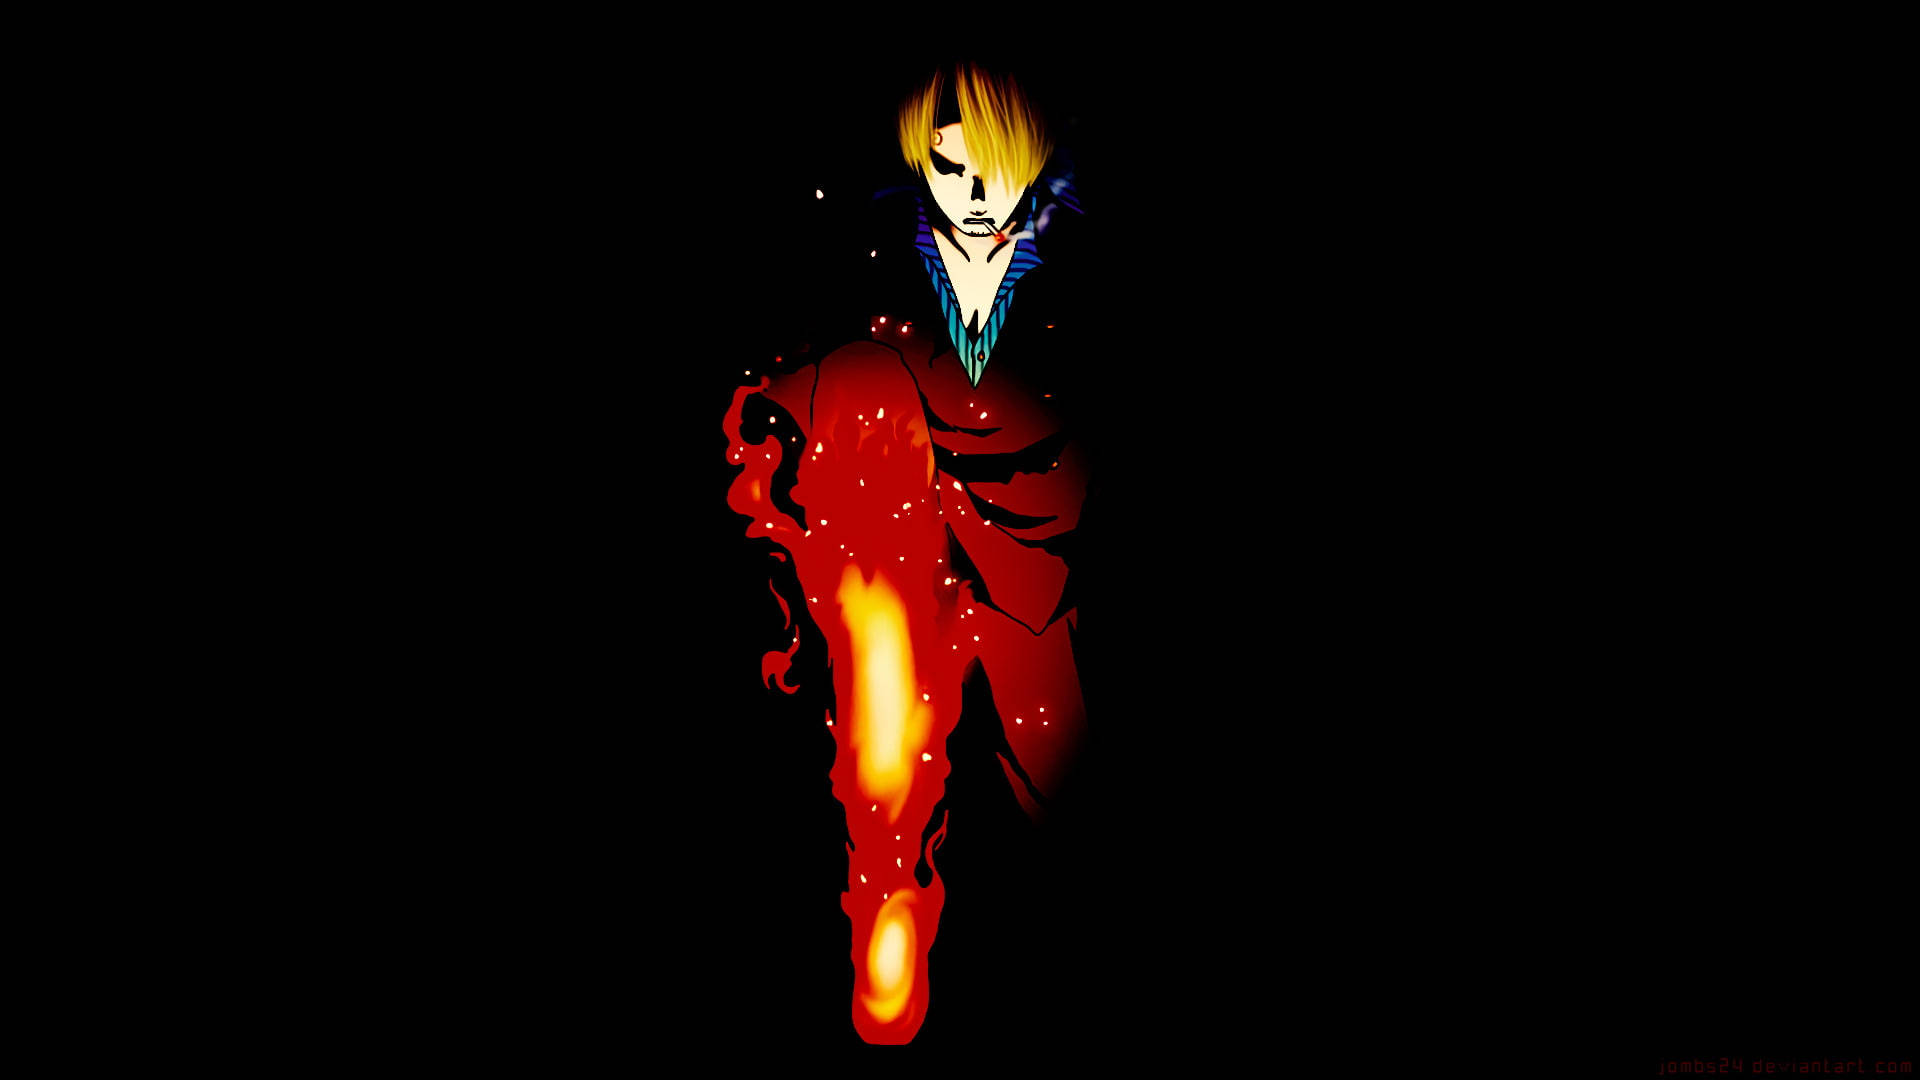 Sanji Delivers A Powerful Devil Kick In The Darkness Background